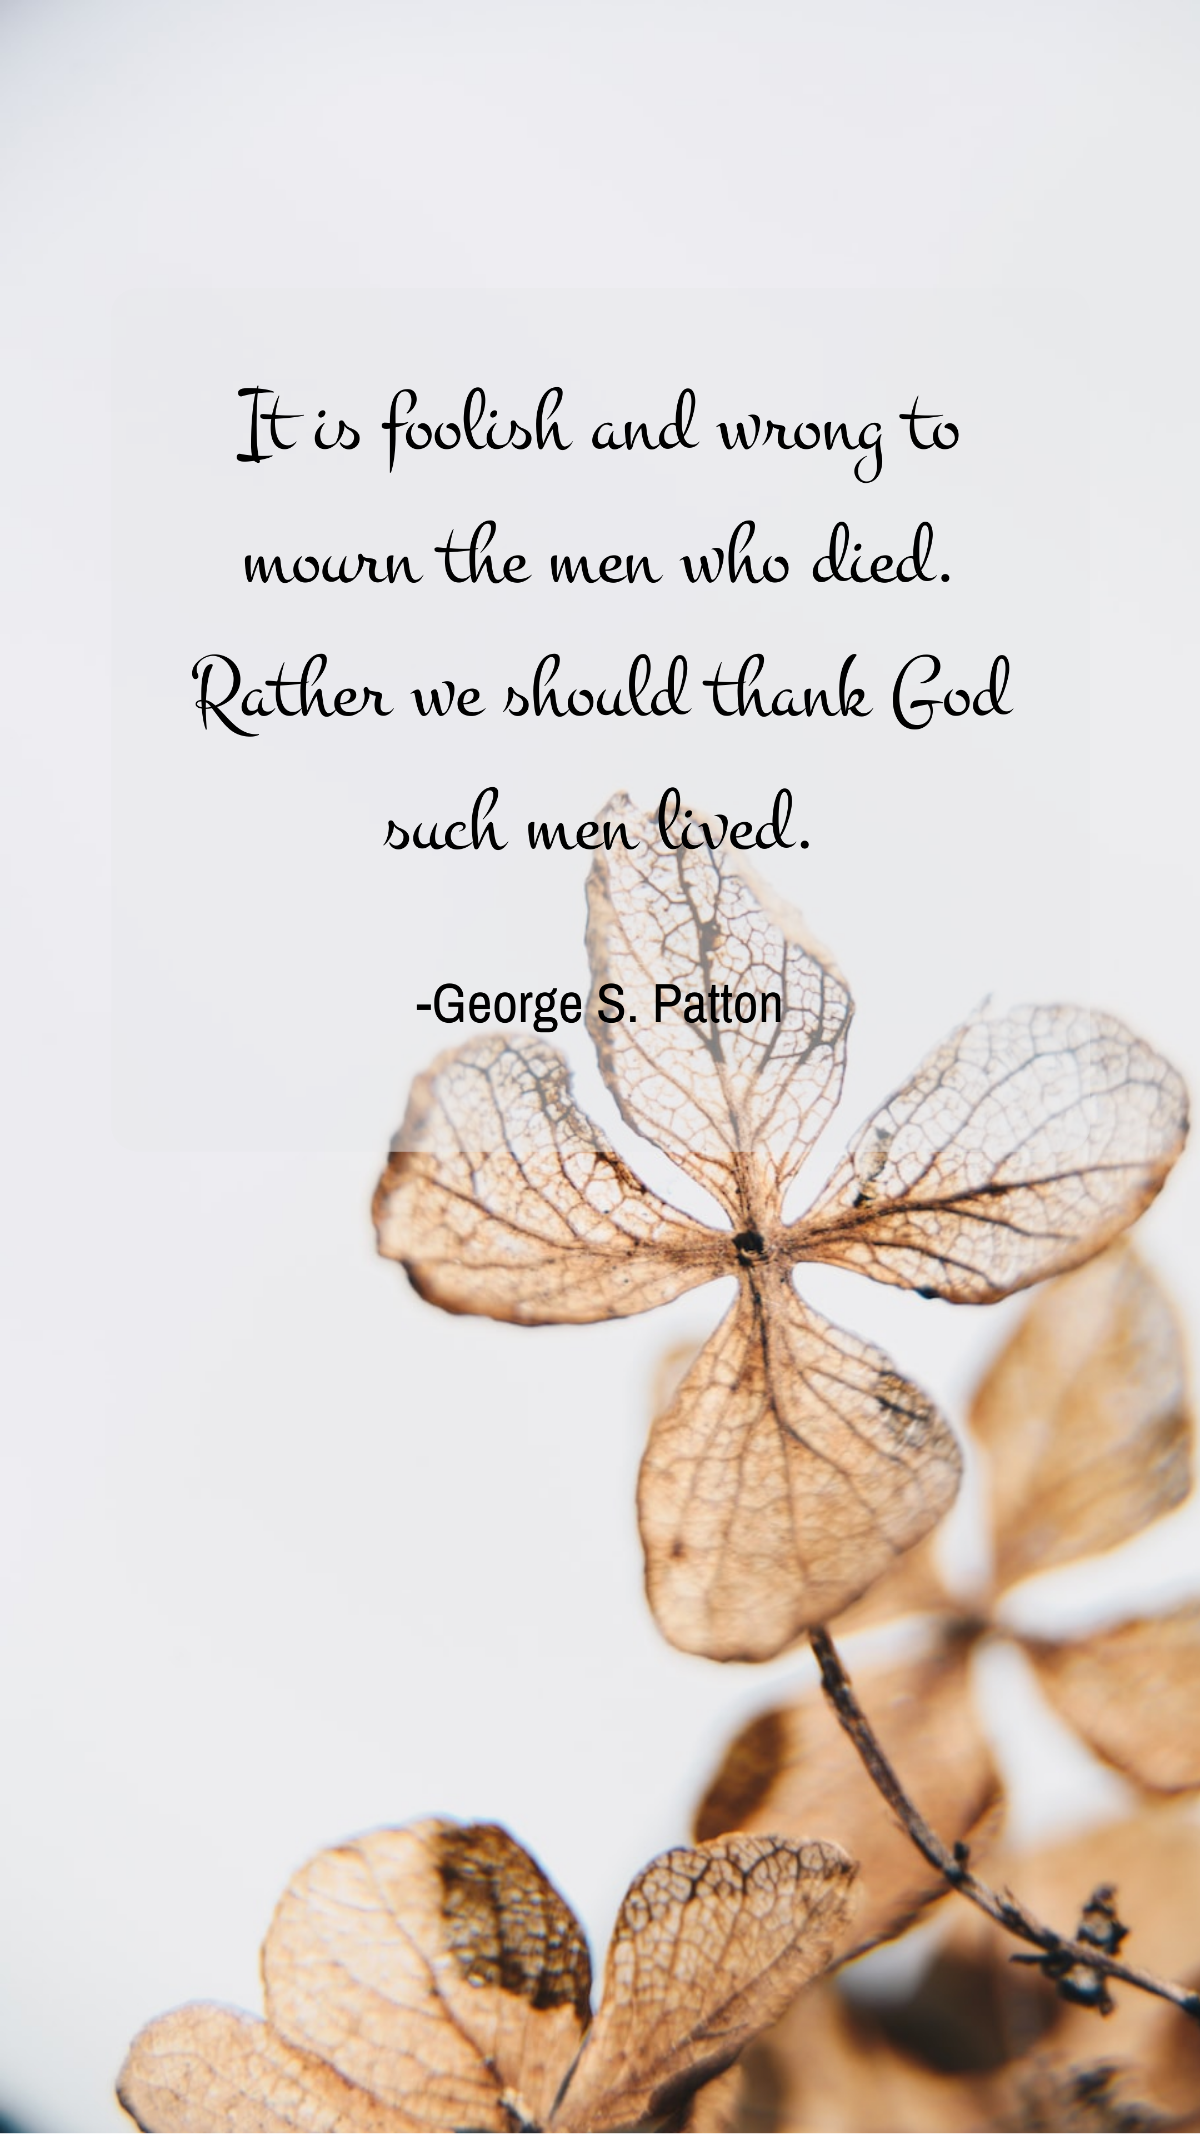 Free George S. Patton - It is foolish and wrong to mourn the men who died. Rather we should thank God such men lived. Template